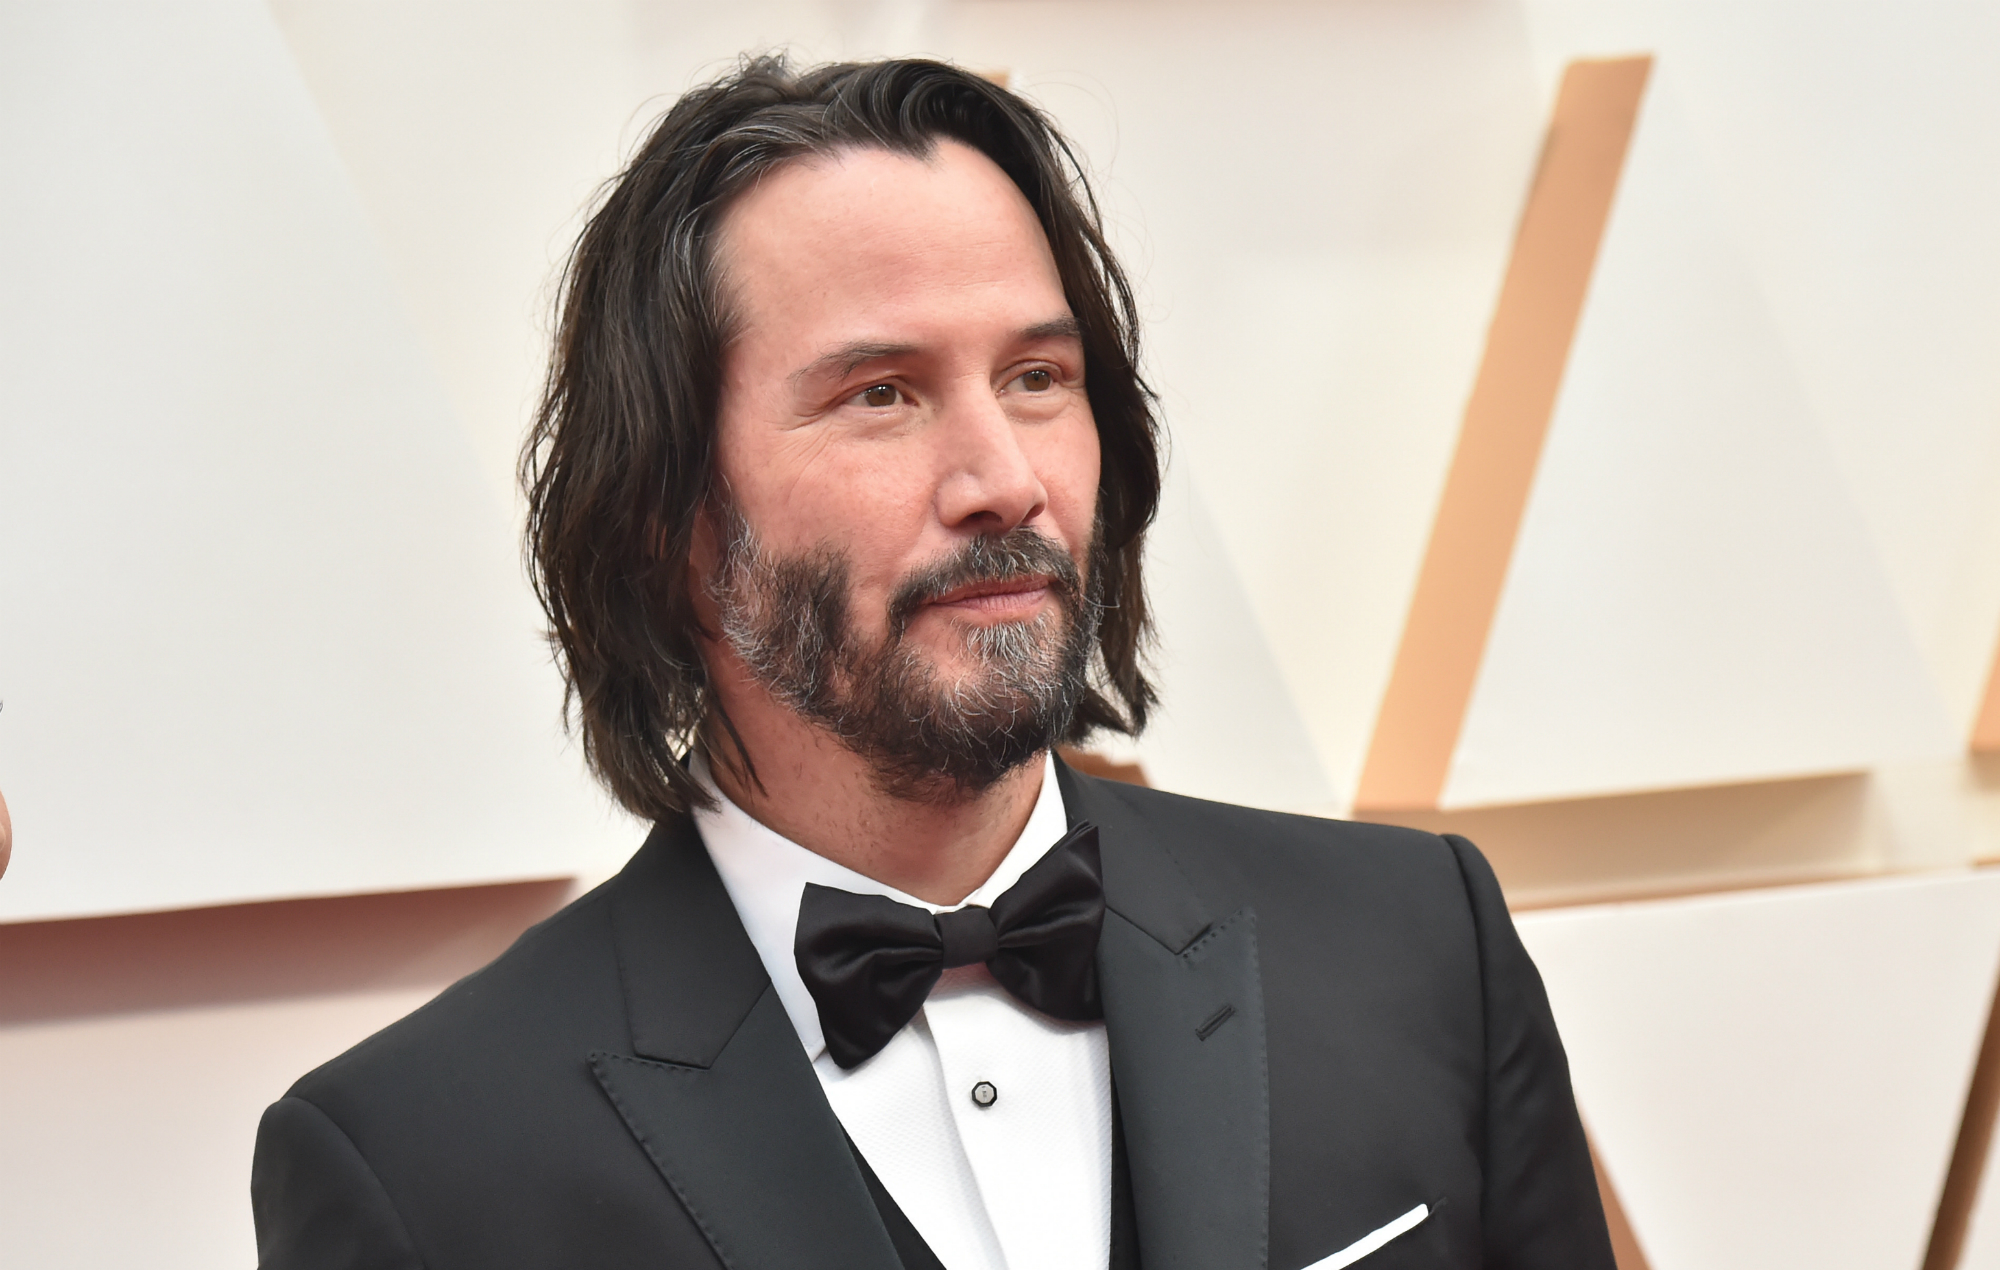 Keanu Reeves because I keep looking at his handsome face not paying attention to the movie.